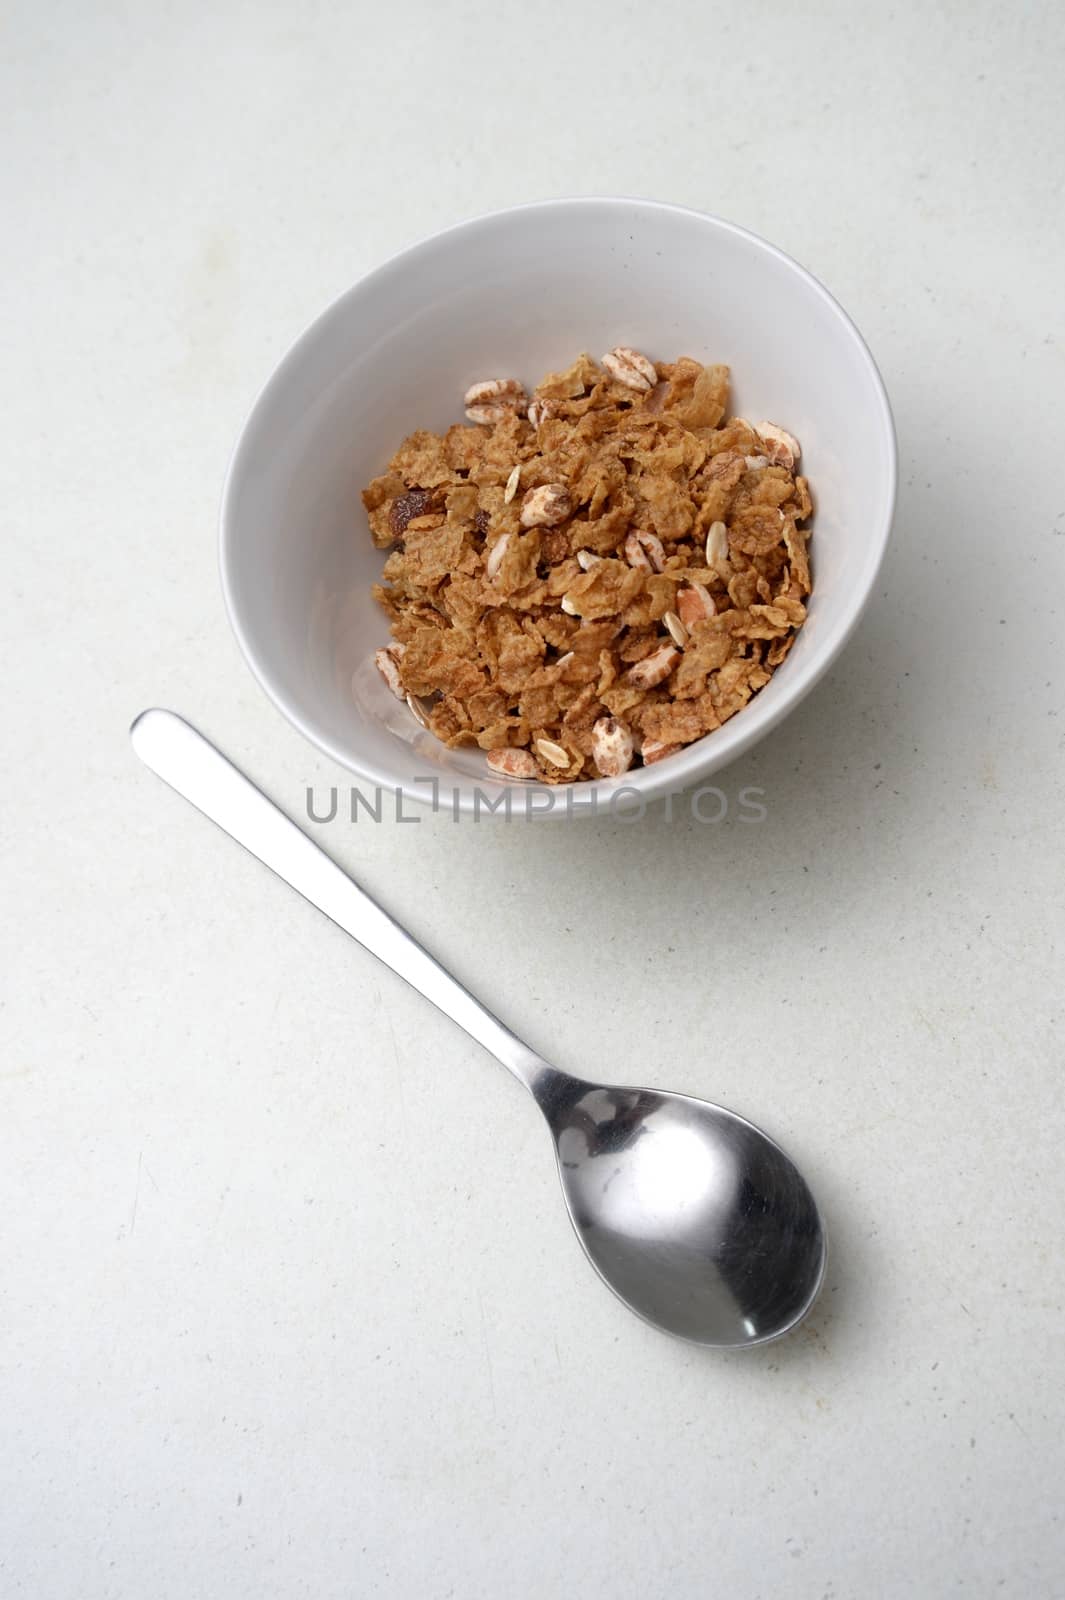 Breakfast ceral in a bowl on a kitchen bench